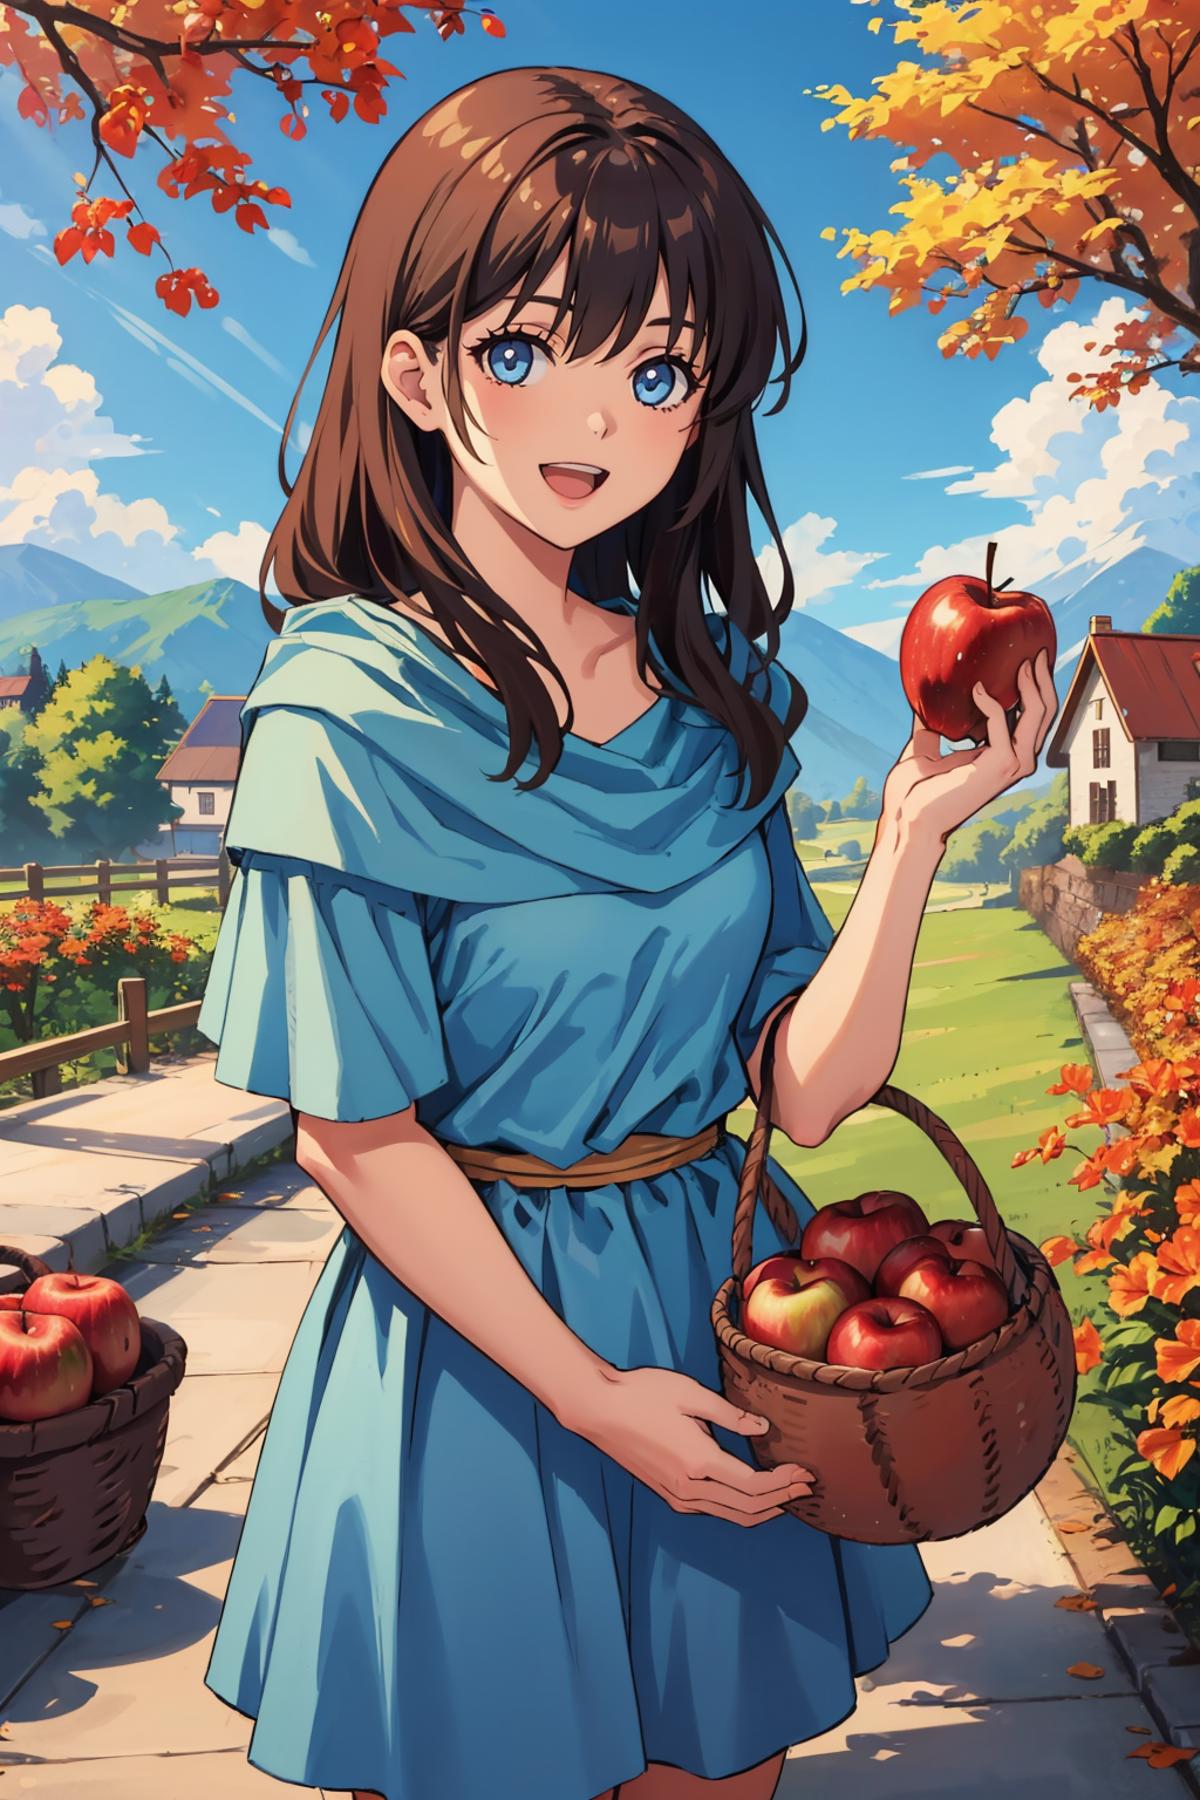 Anime girl holding a basket of apples in a field.